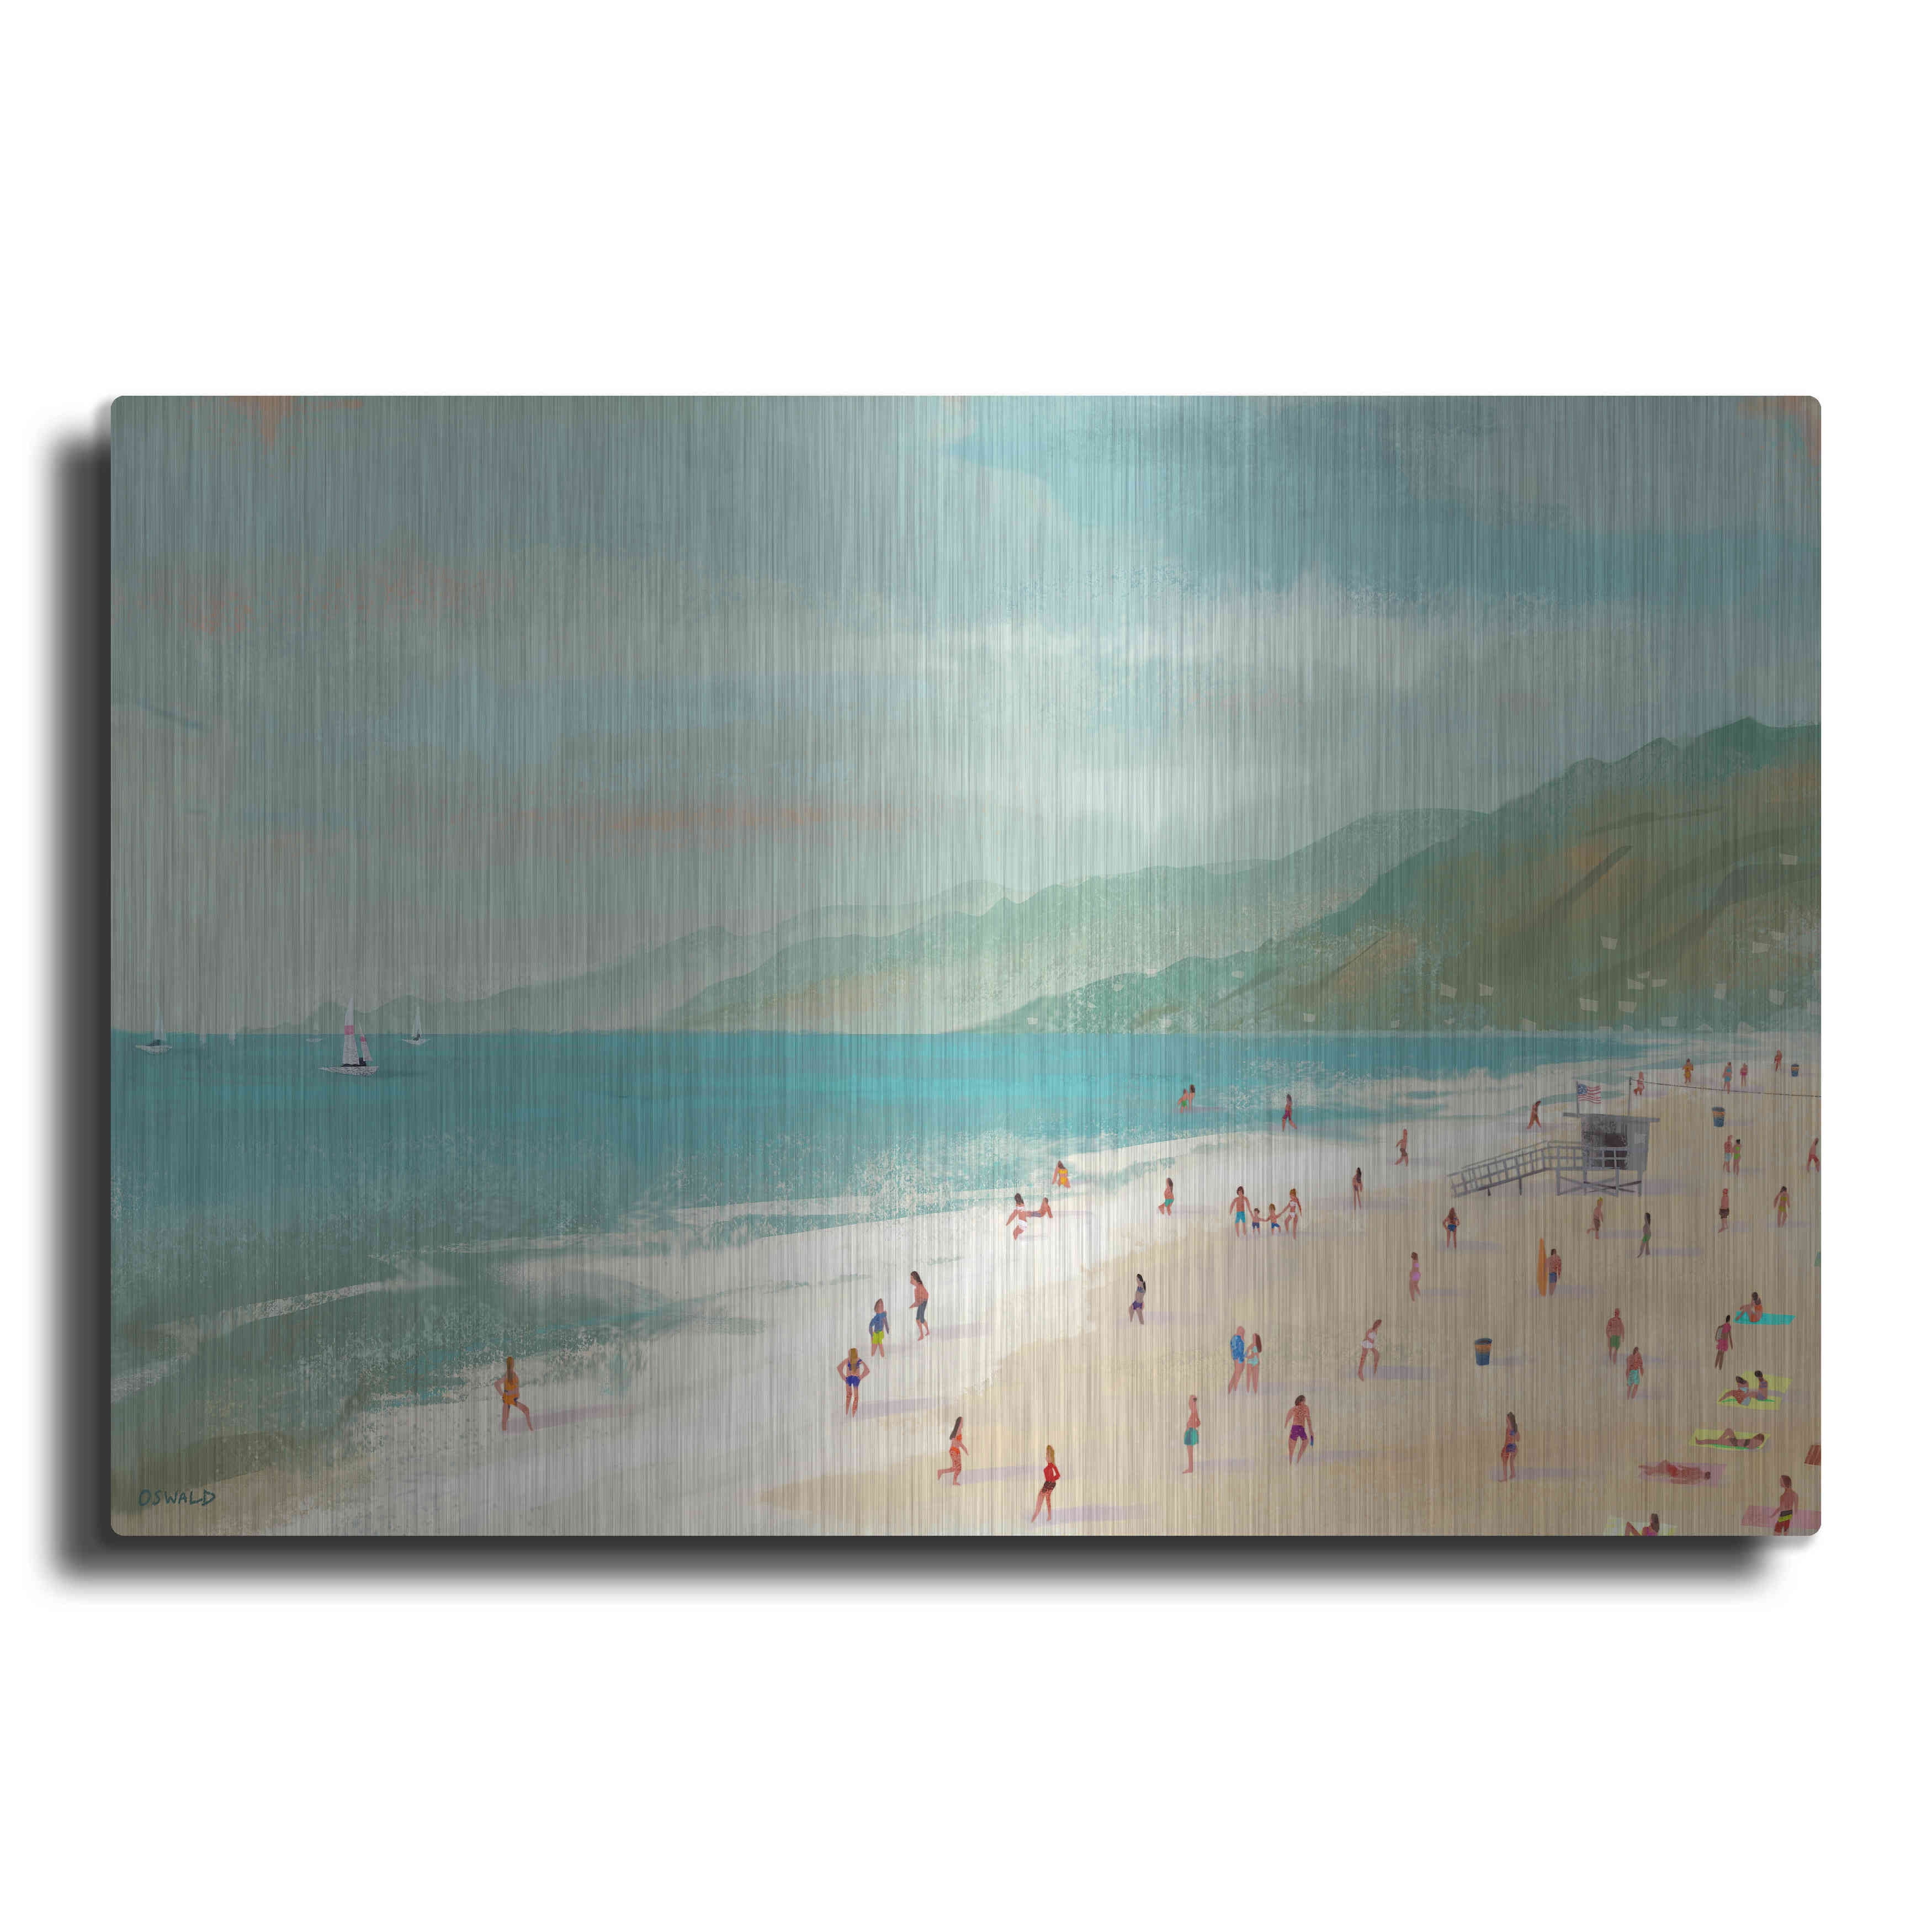 24 in x 36 in, Ready-to-Hang Santa Monica Beach by Pete Oswald Premium Gallery-Wrapped Canvas Giclee Art